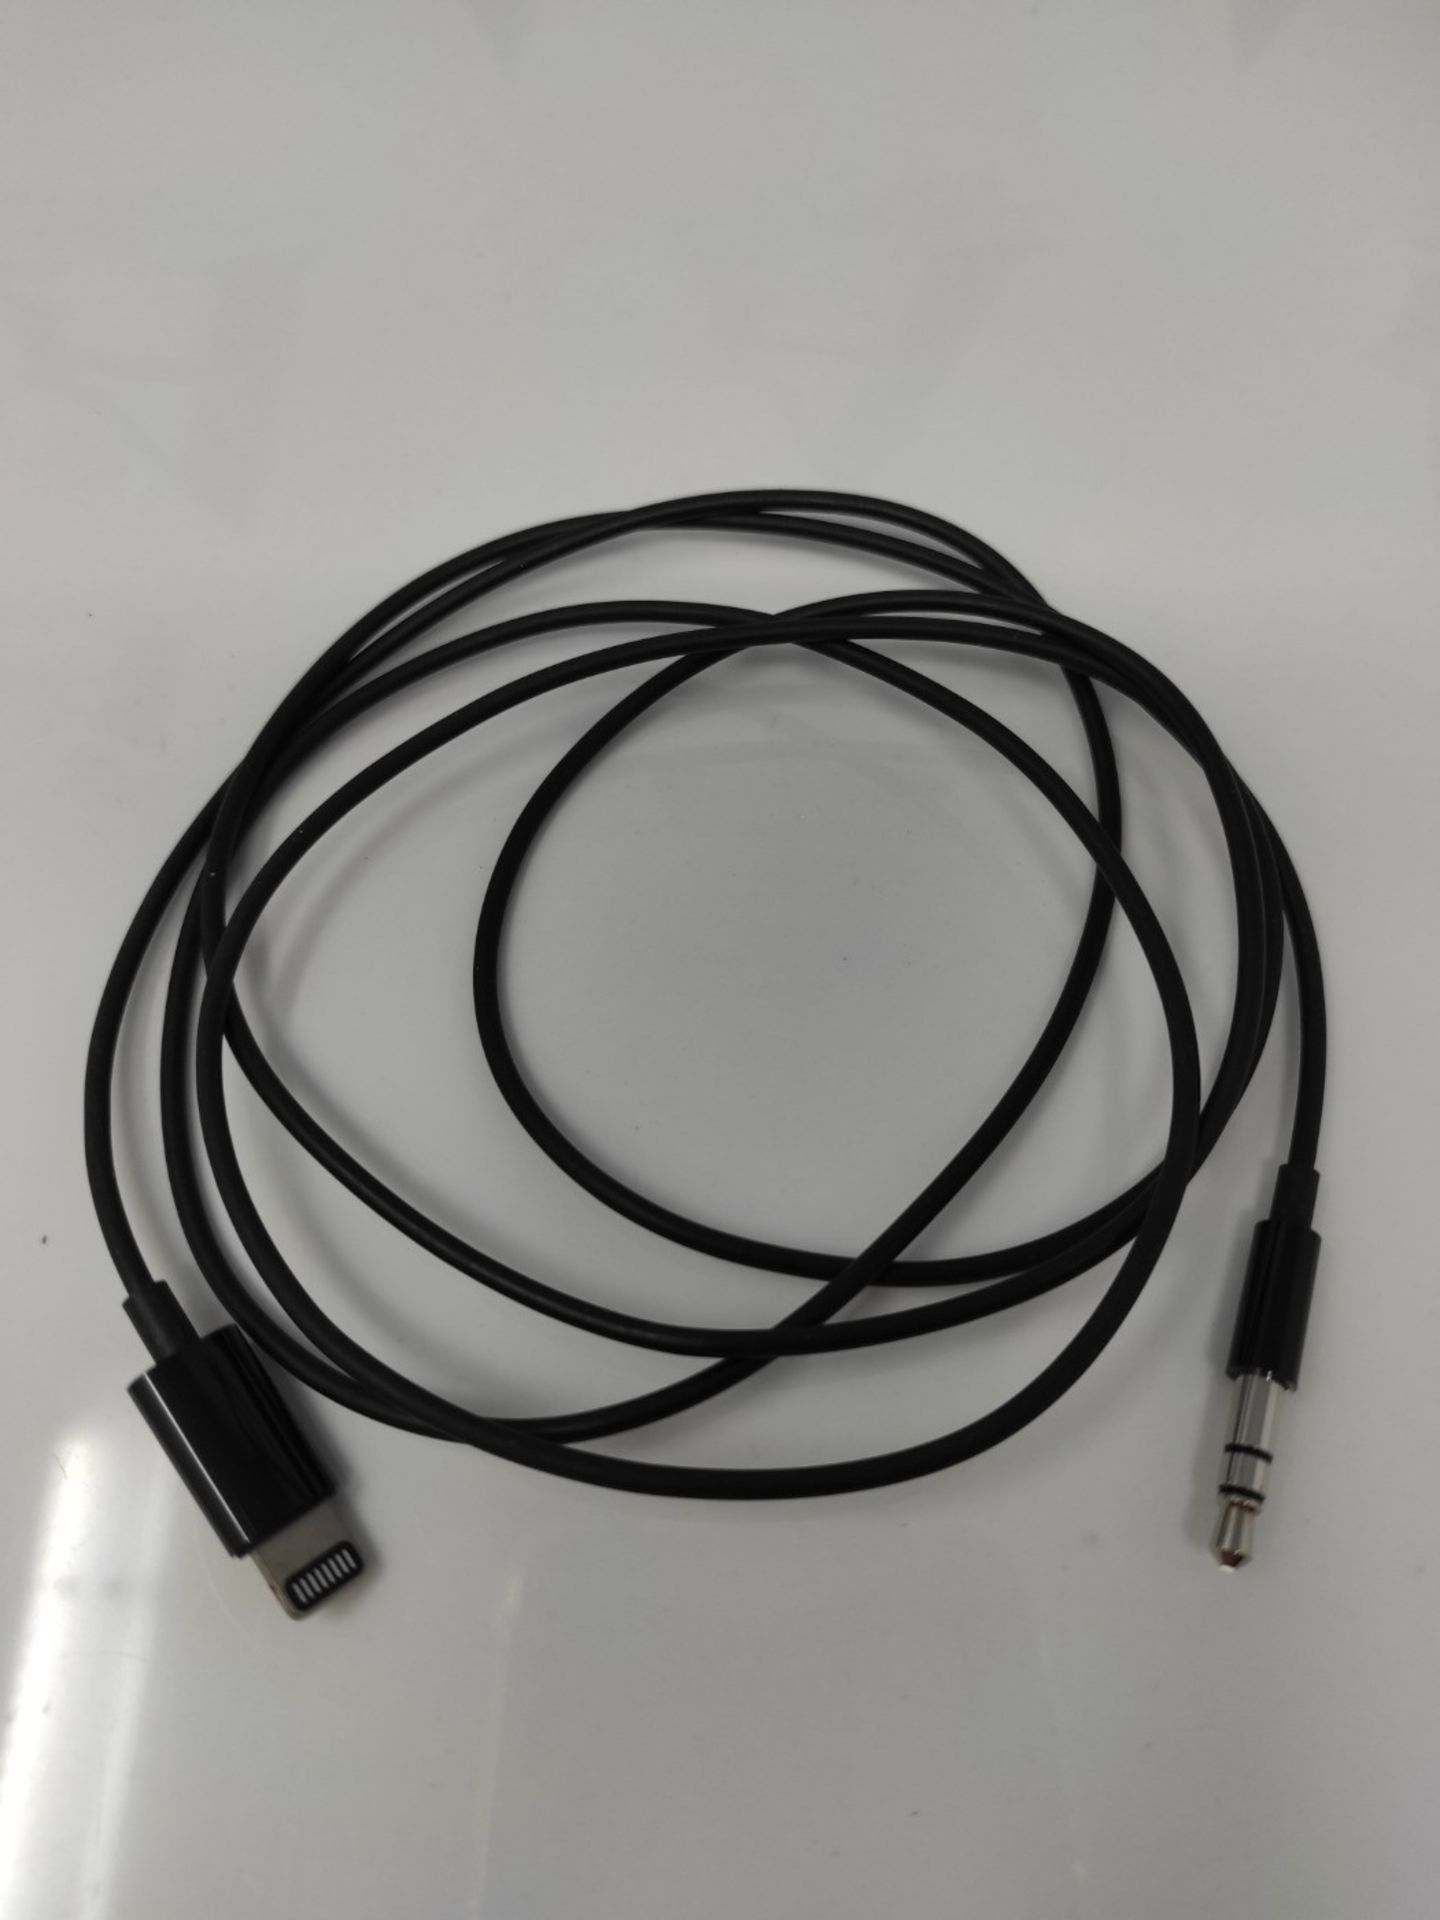 Apple Lightning to 3.5mm Audio Cable - Image 2 of 2